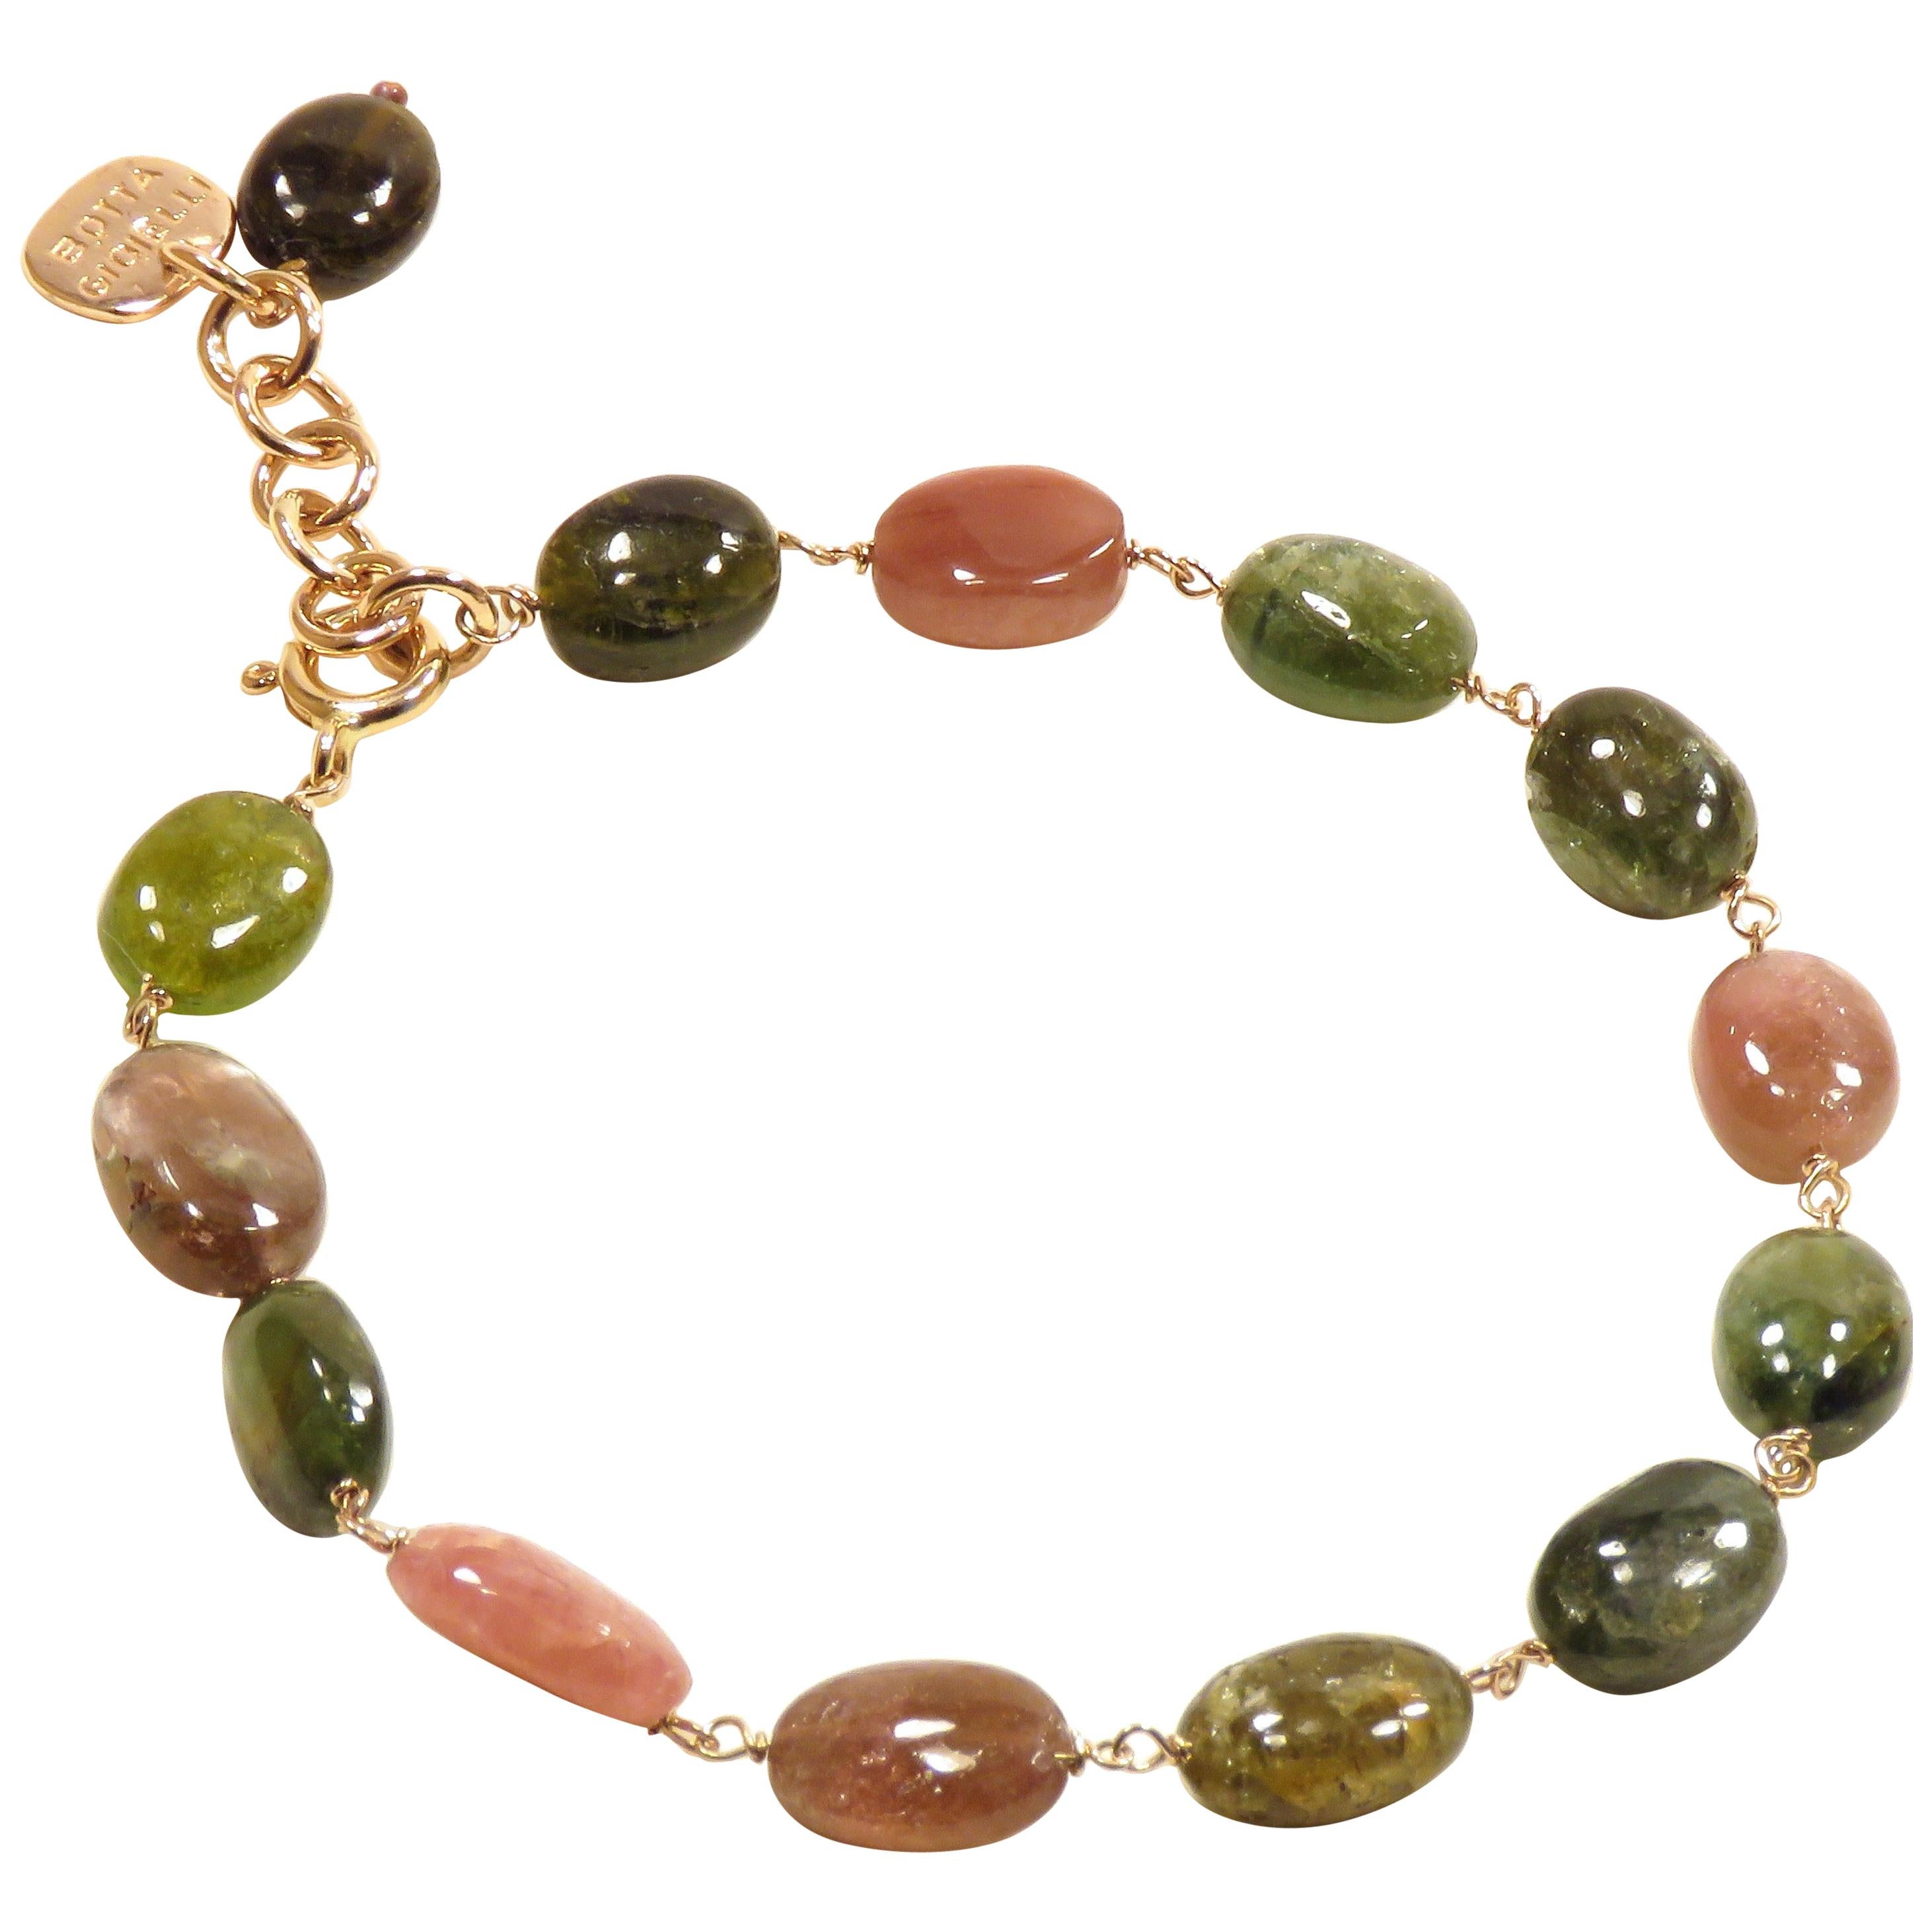 Tourmaline Rose Gold Bracelet Handcrafted in Italy by Botta Gioielli